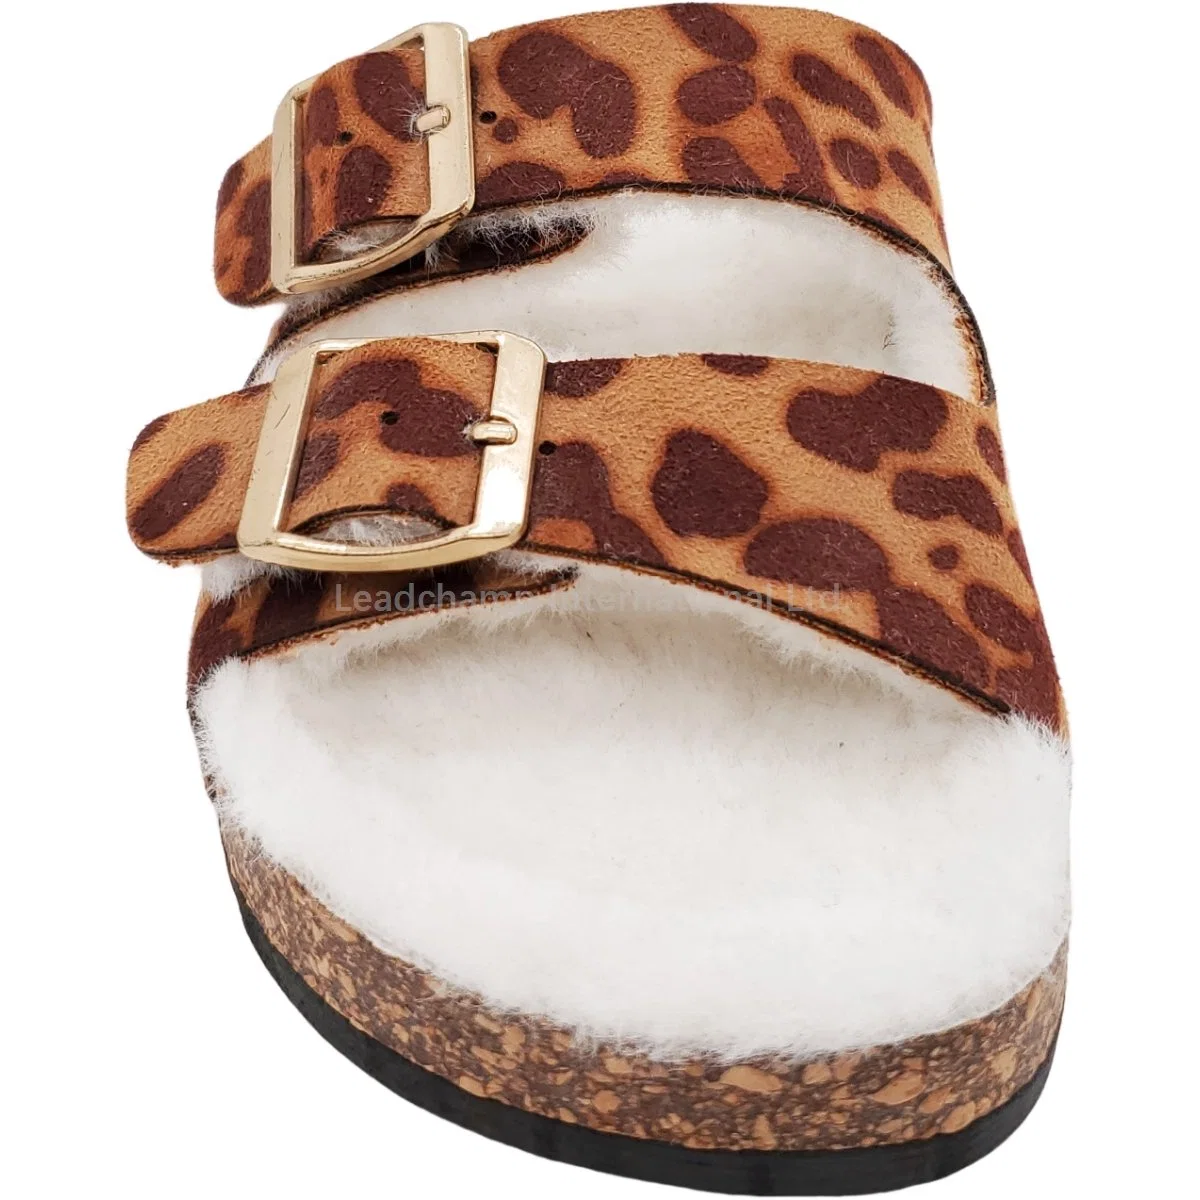 Fashion Summer Animal Print Women Casual Shoes Slippers Sandals